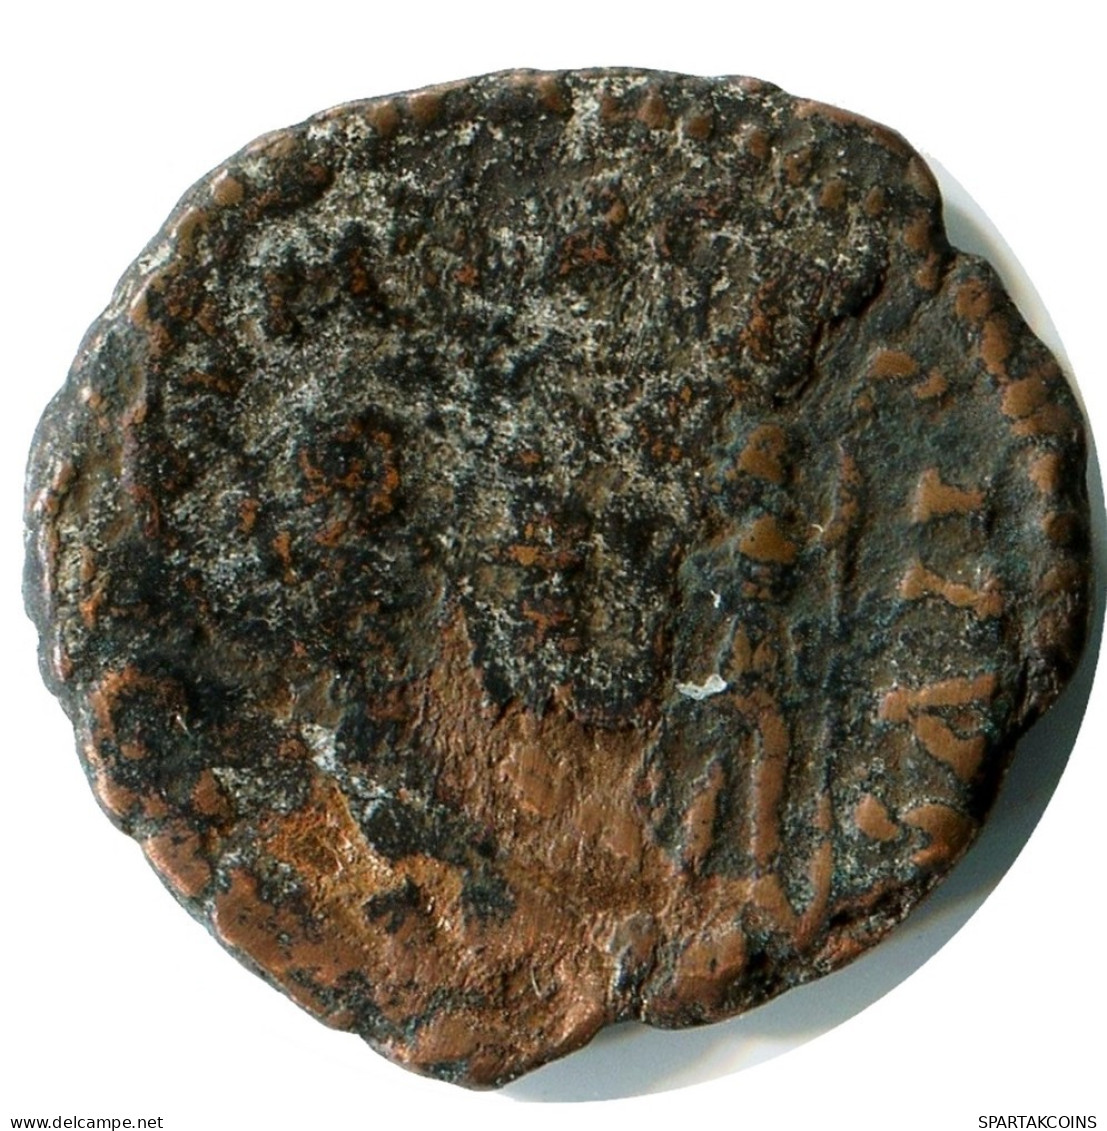 CONSTANS MINTED IN CONSTANTINOPLE FOUND IN IHNASYAH HOARD EGYPT #ANC11938.14.D.A - L'Empire Chrétien (307 à 363)